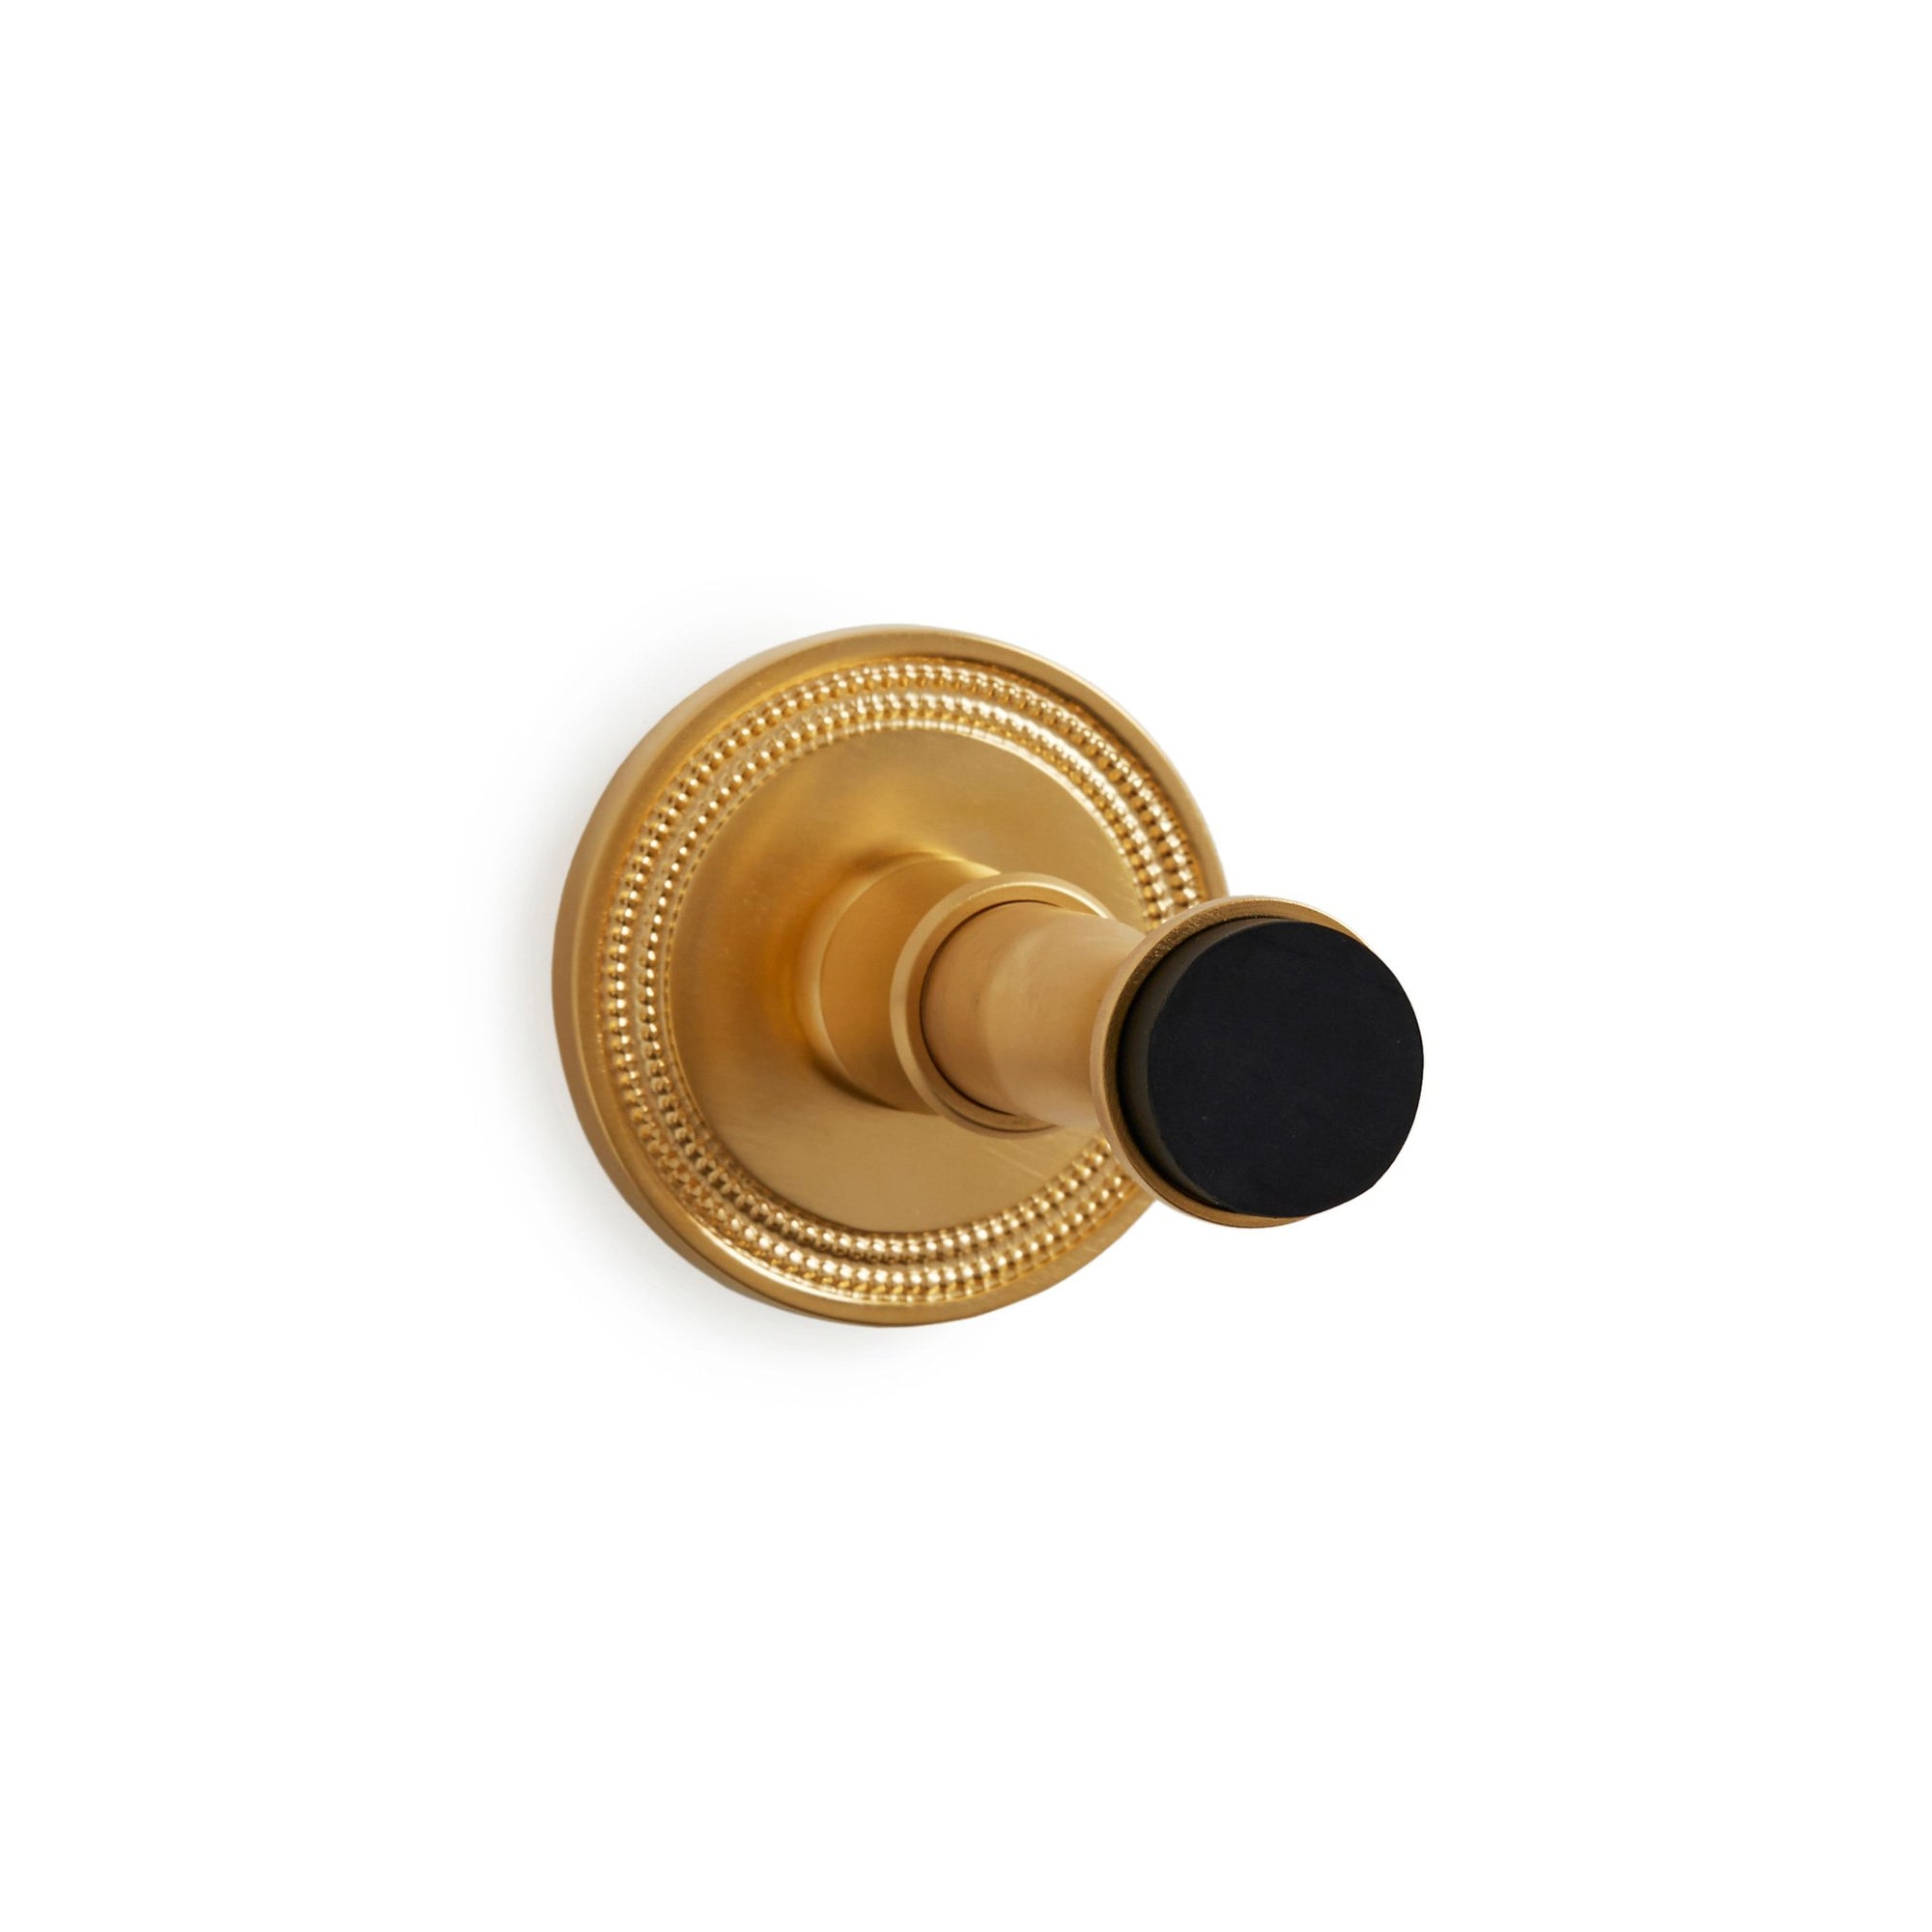 2918-1033BP-GP Sherle Wagner International Baseboard Door Stop with Concentric Circles Back Plate in Gold Plate metal finish